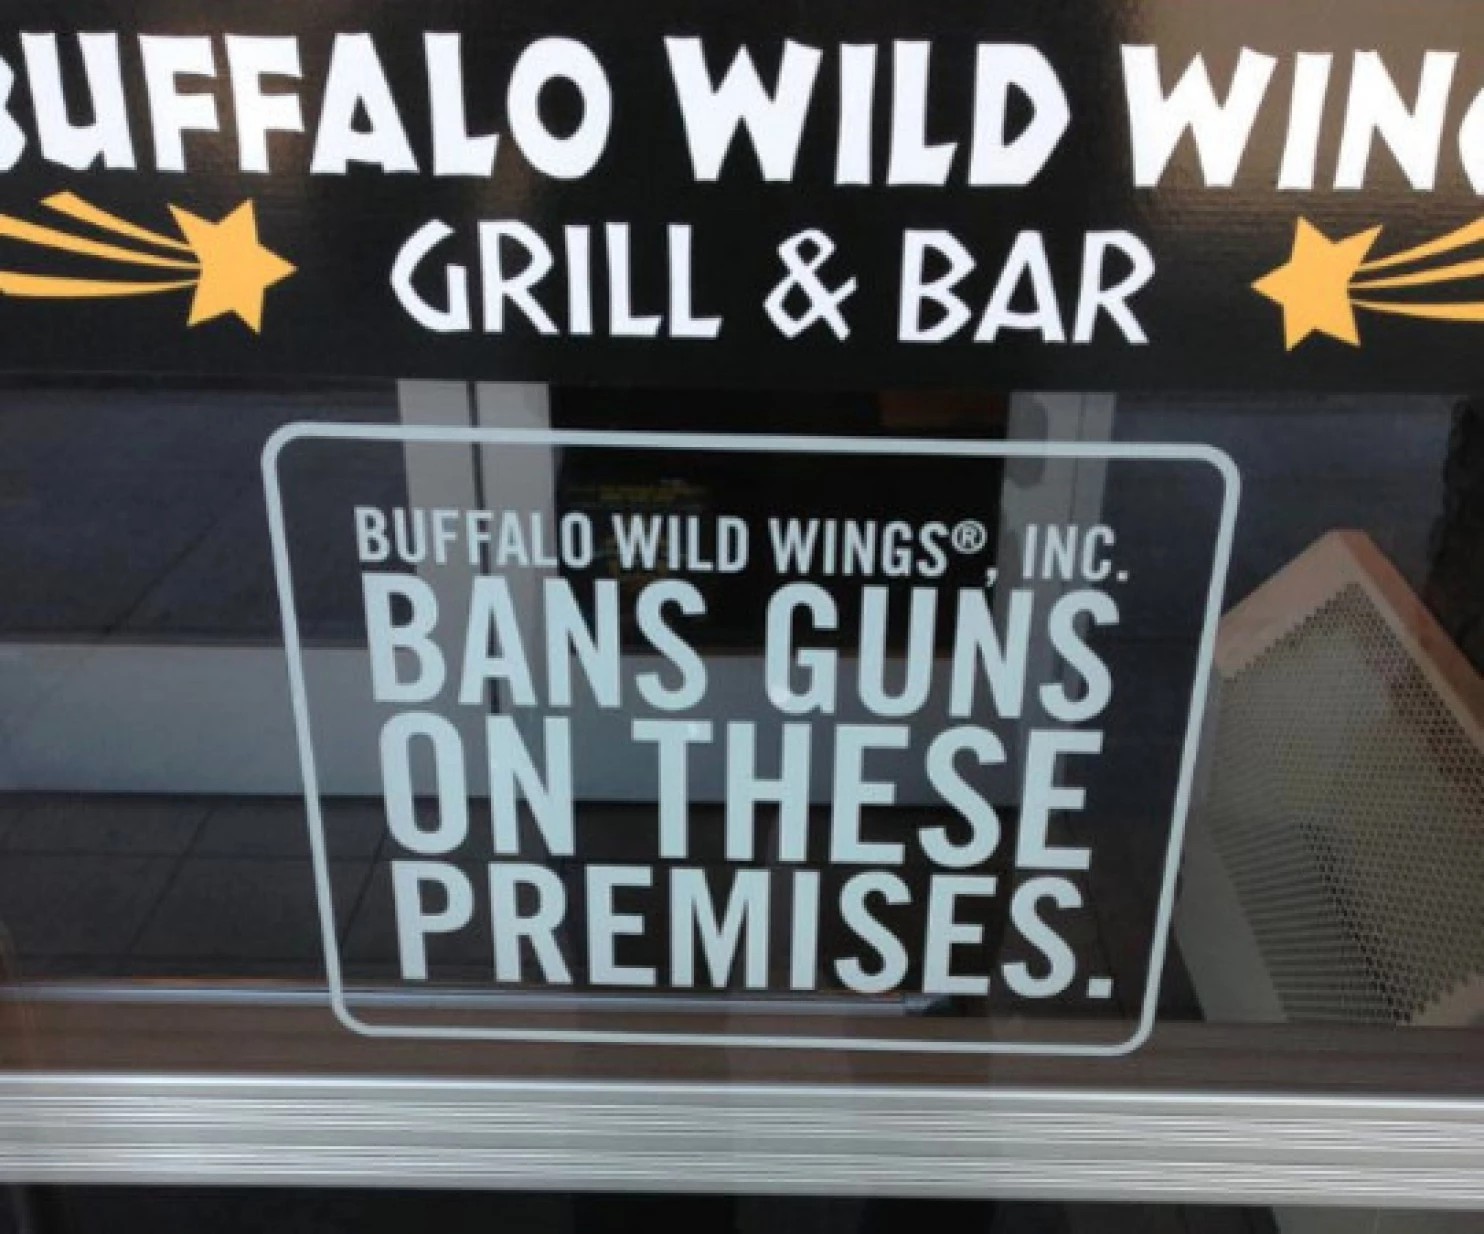 Buffalo Wild Wings Refuses Service to Arhmed Police Persons